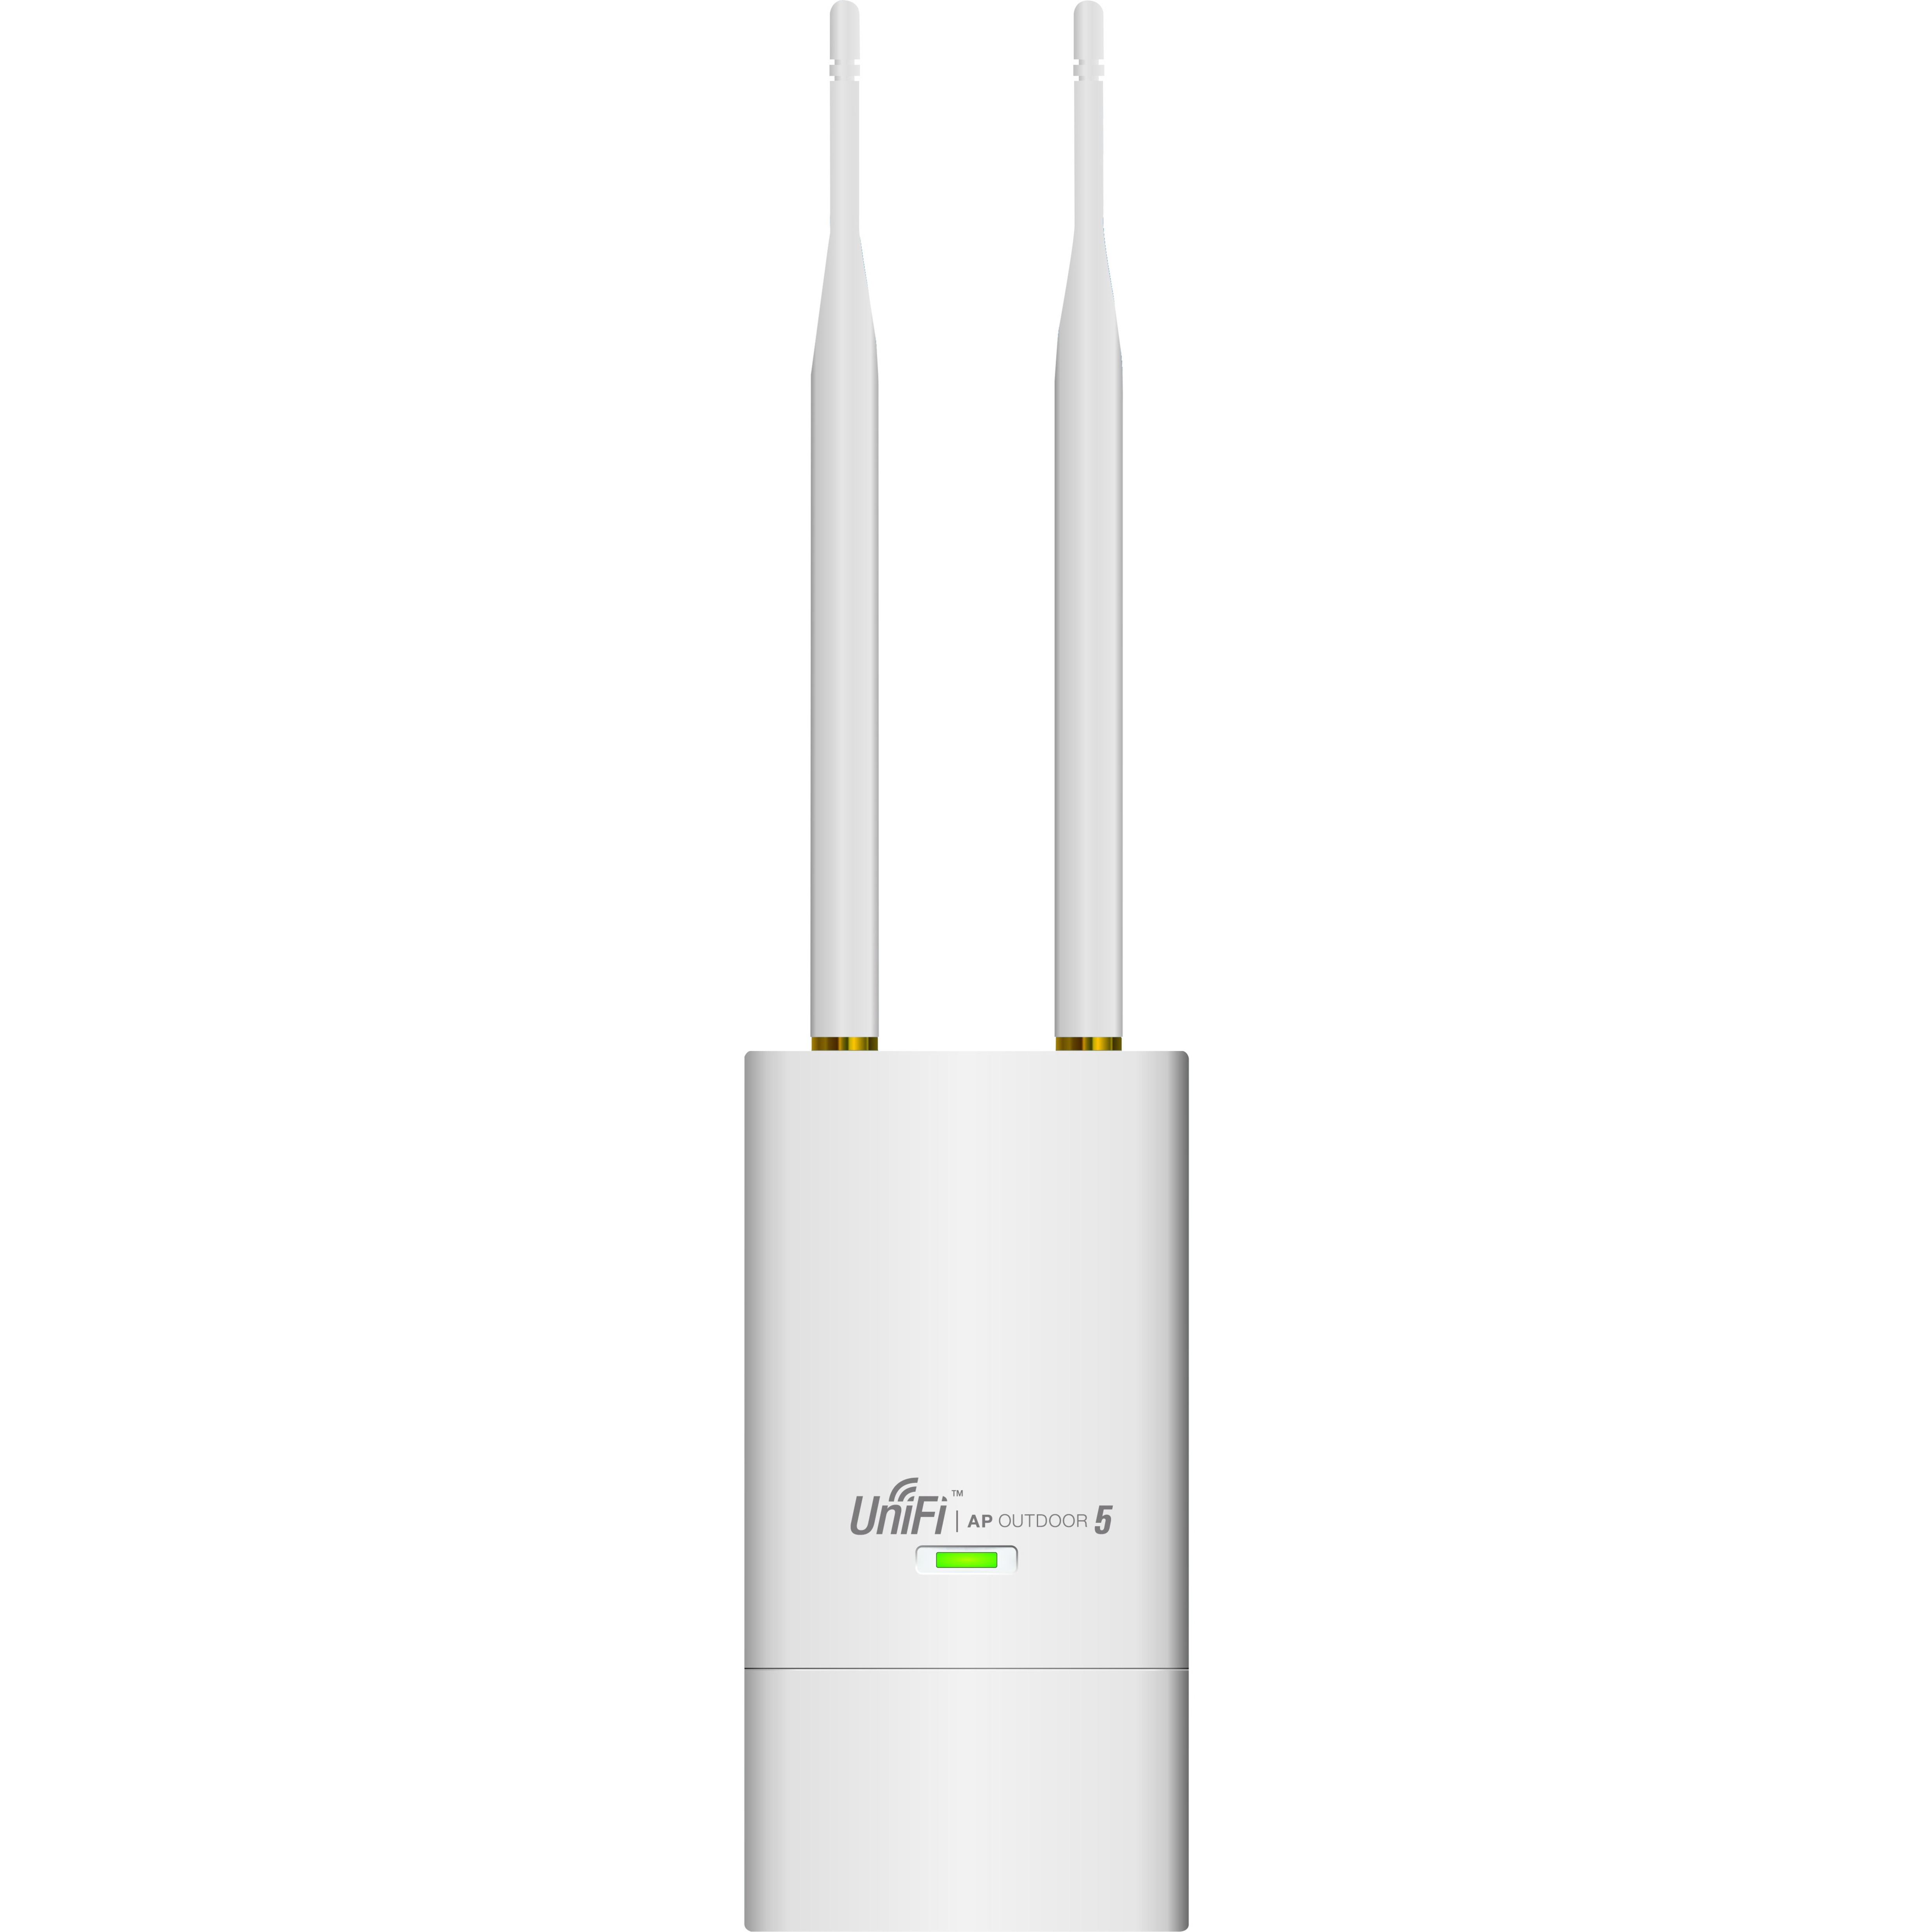 Ubiquiti UniFi UAP-Outdoor5 IEEE 802.11n 300 Mbit/s Wireless Access Point - image 1 of 16